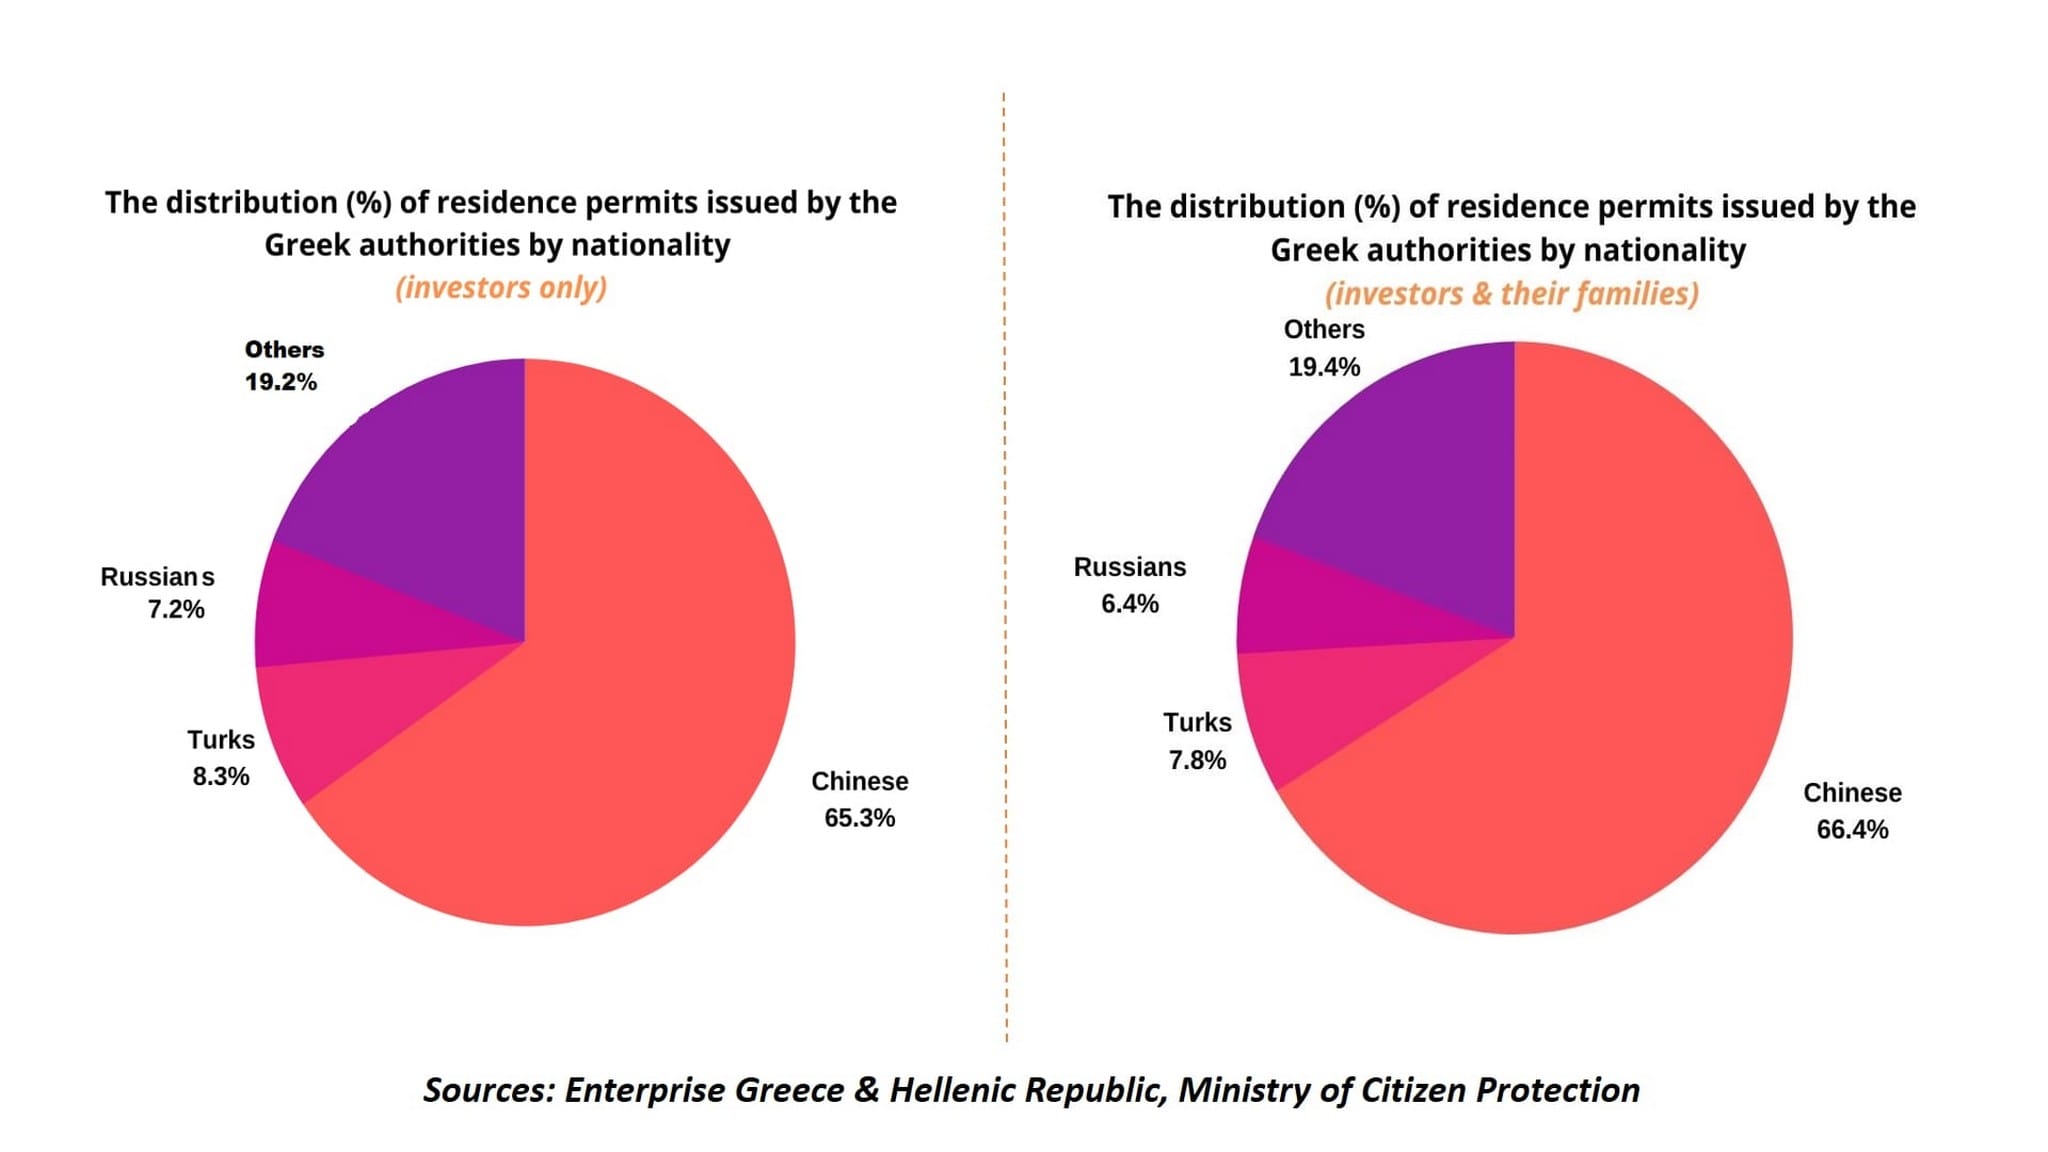 Distribution of Residence Permits by Divine Property